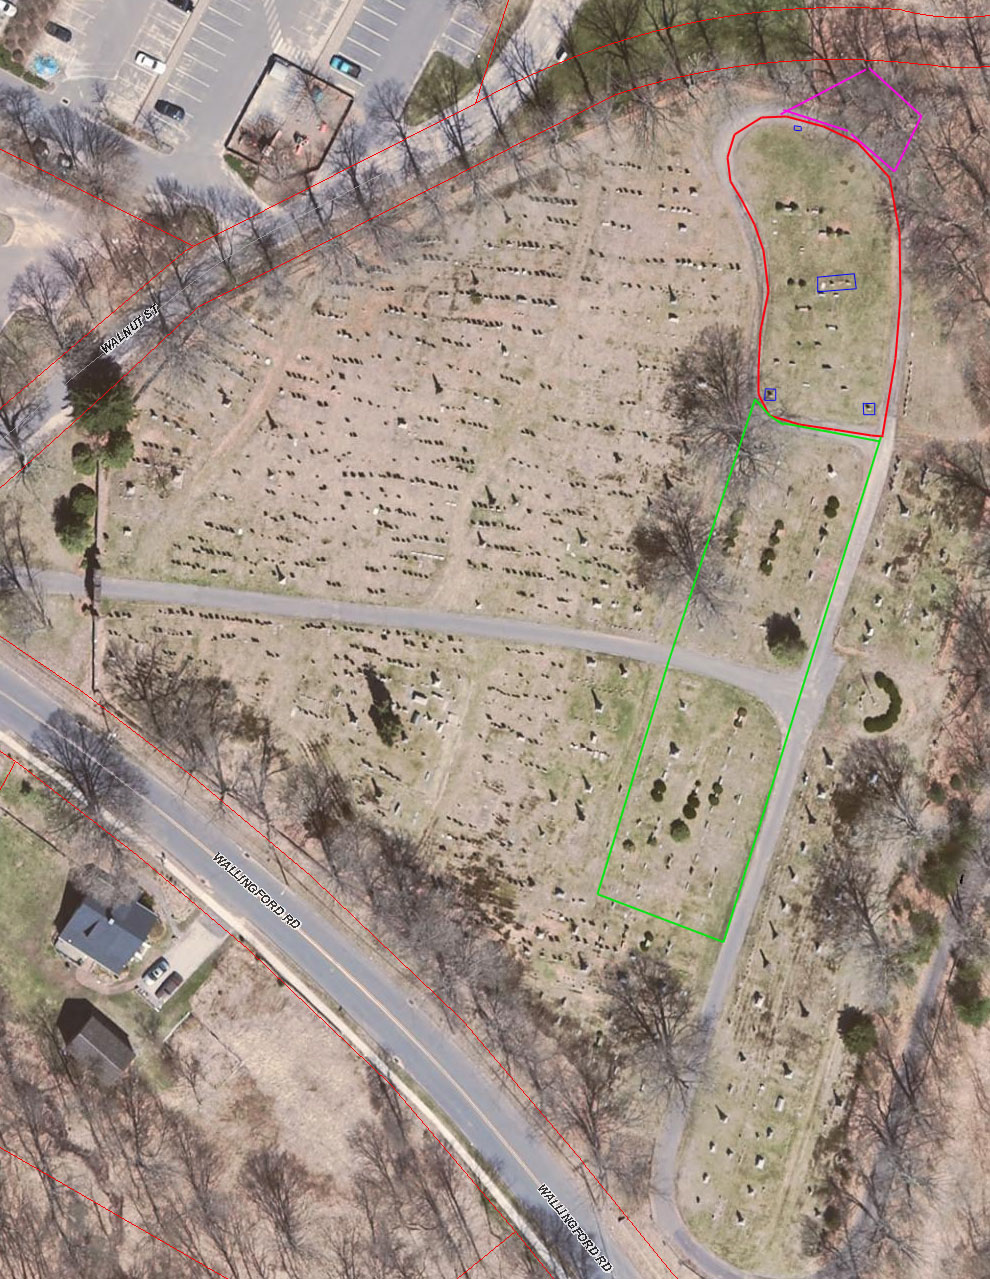 Aerial view of Hillside Cemetery with the African Burying Place outlines